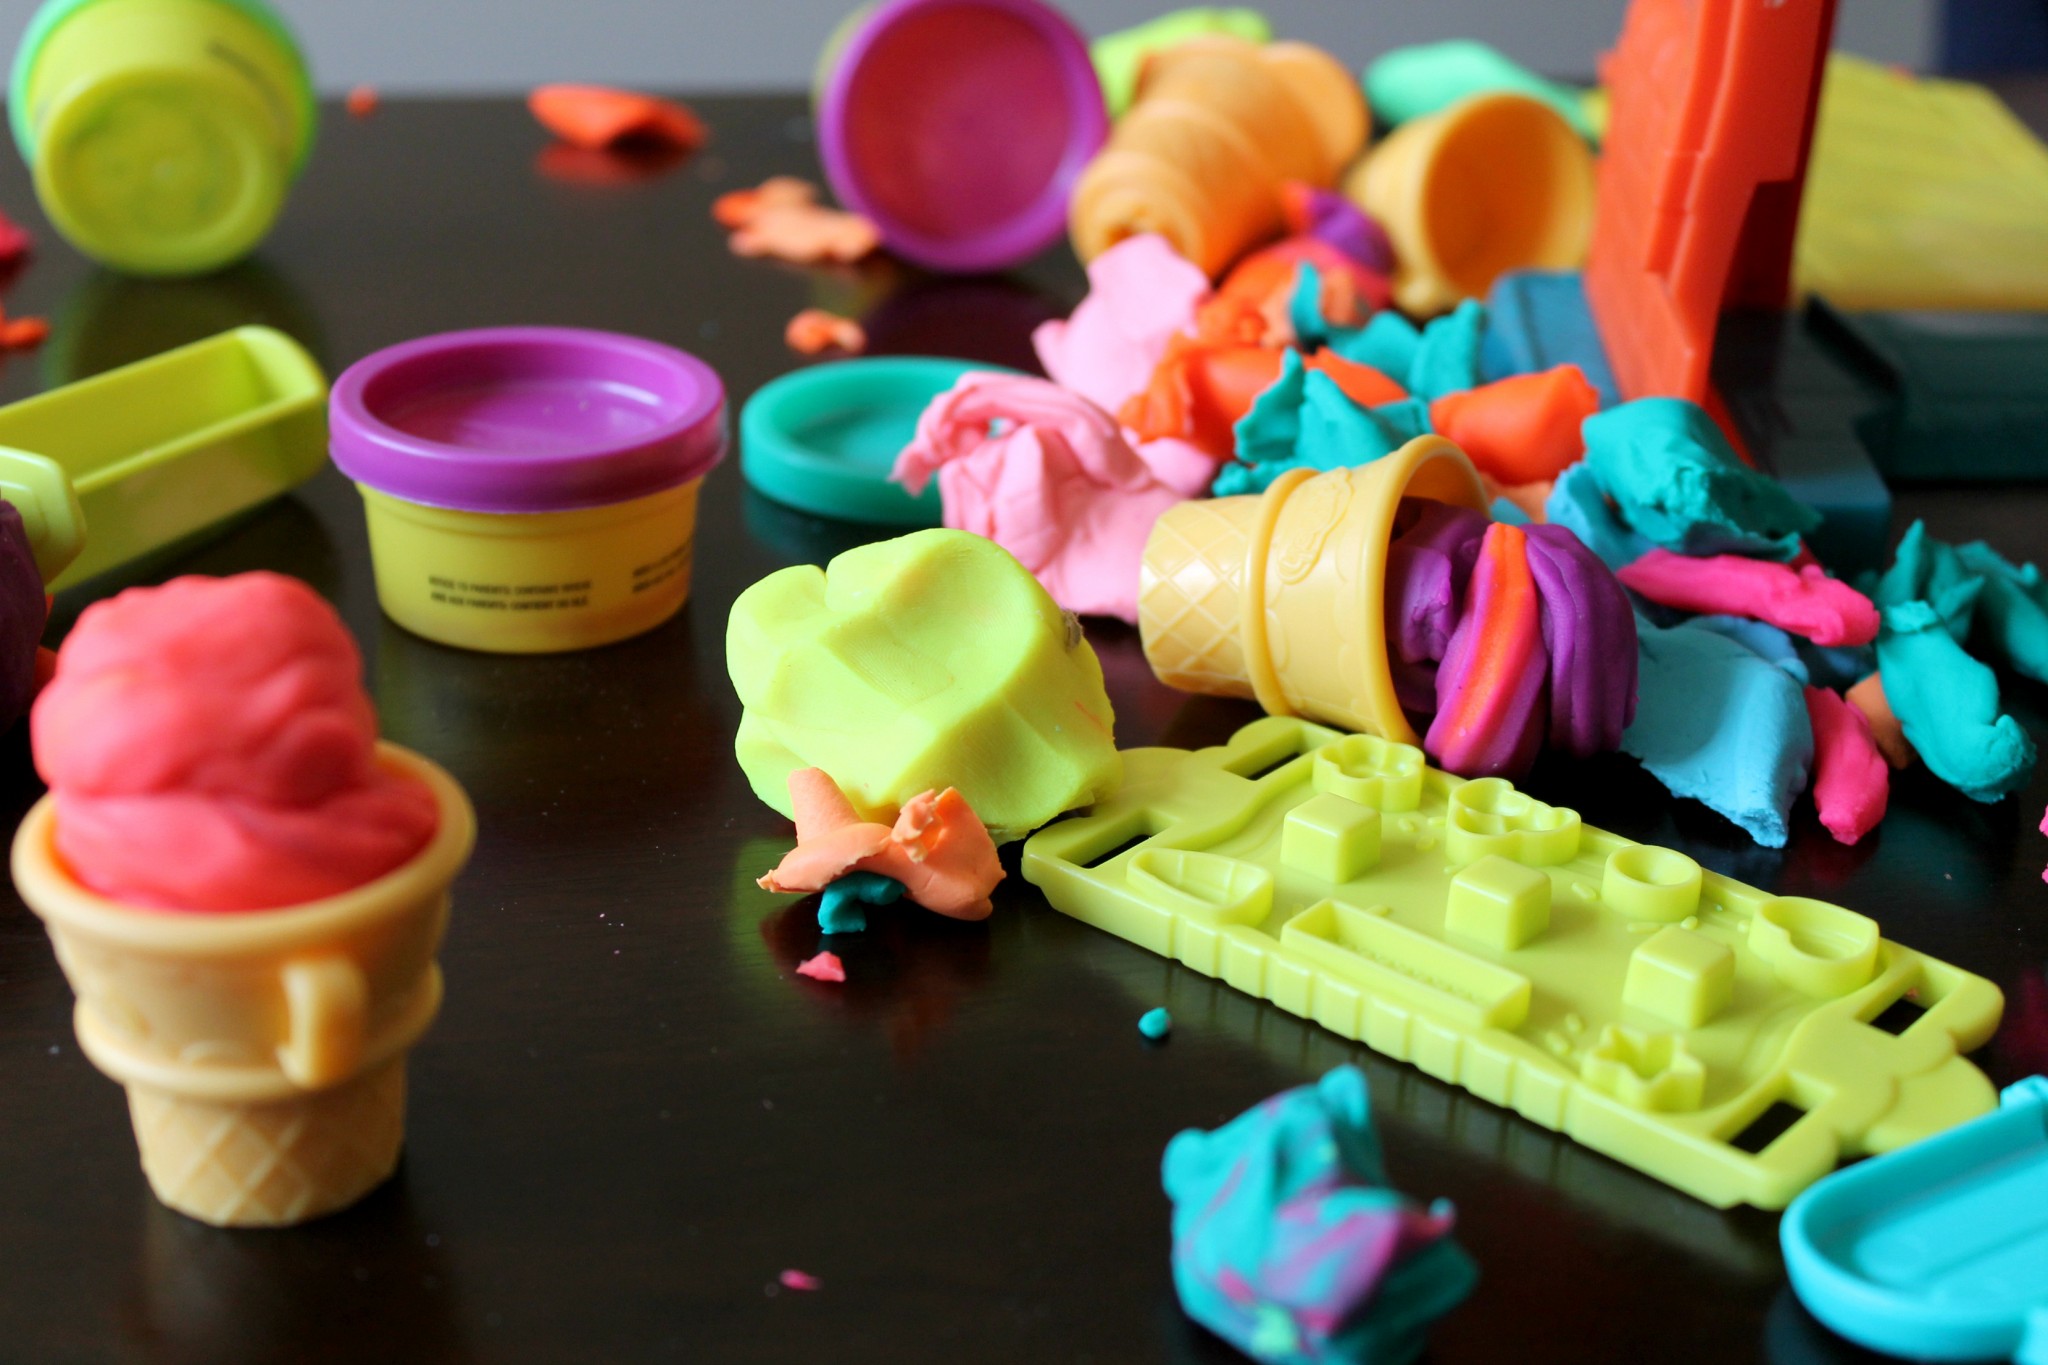 Fun with PLAY-DOH TOWN!